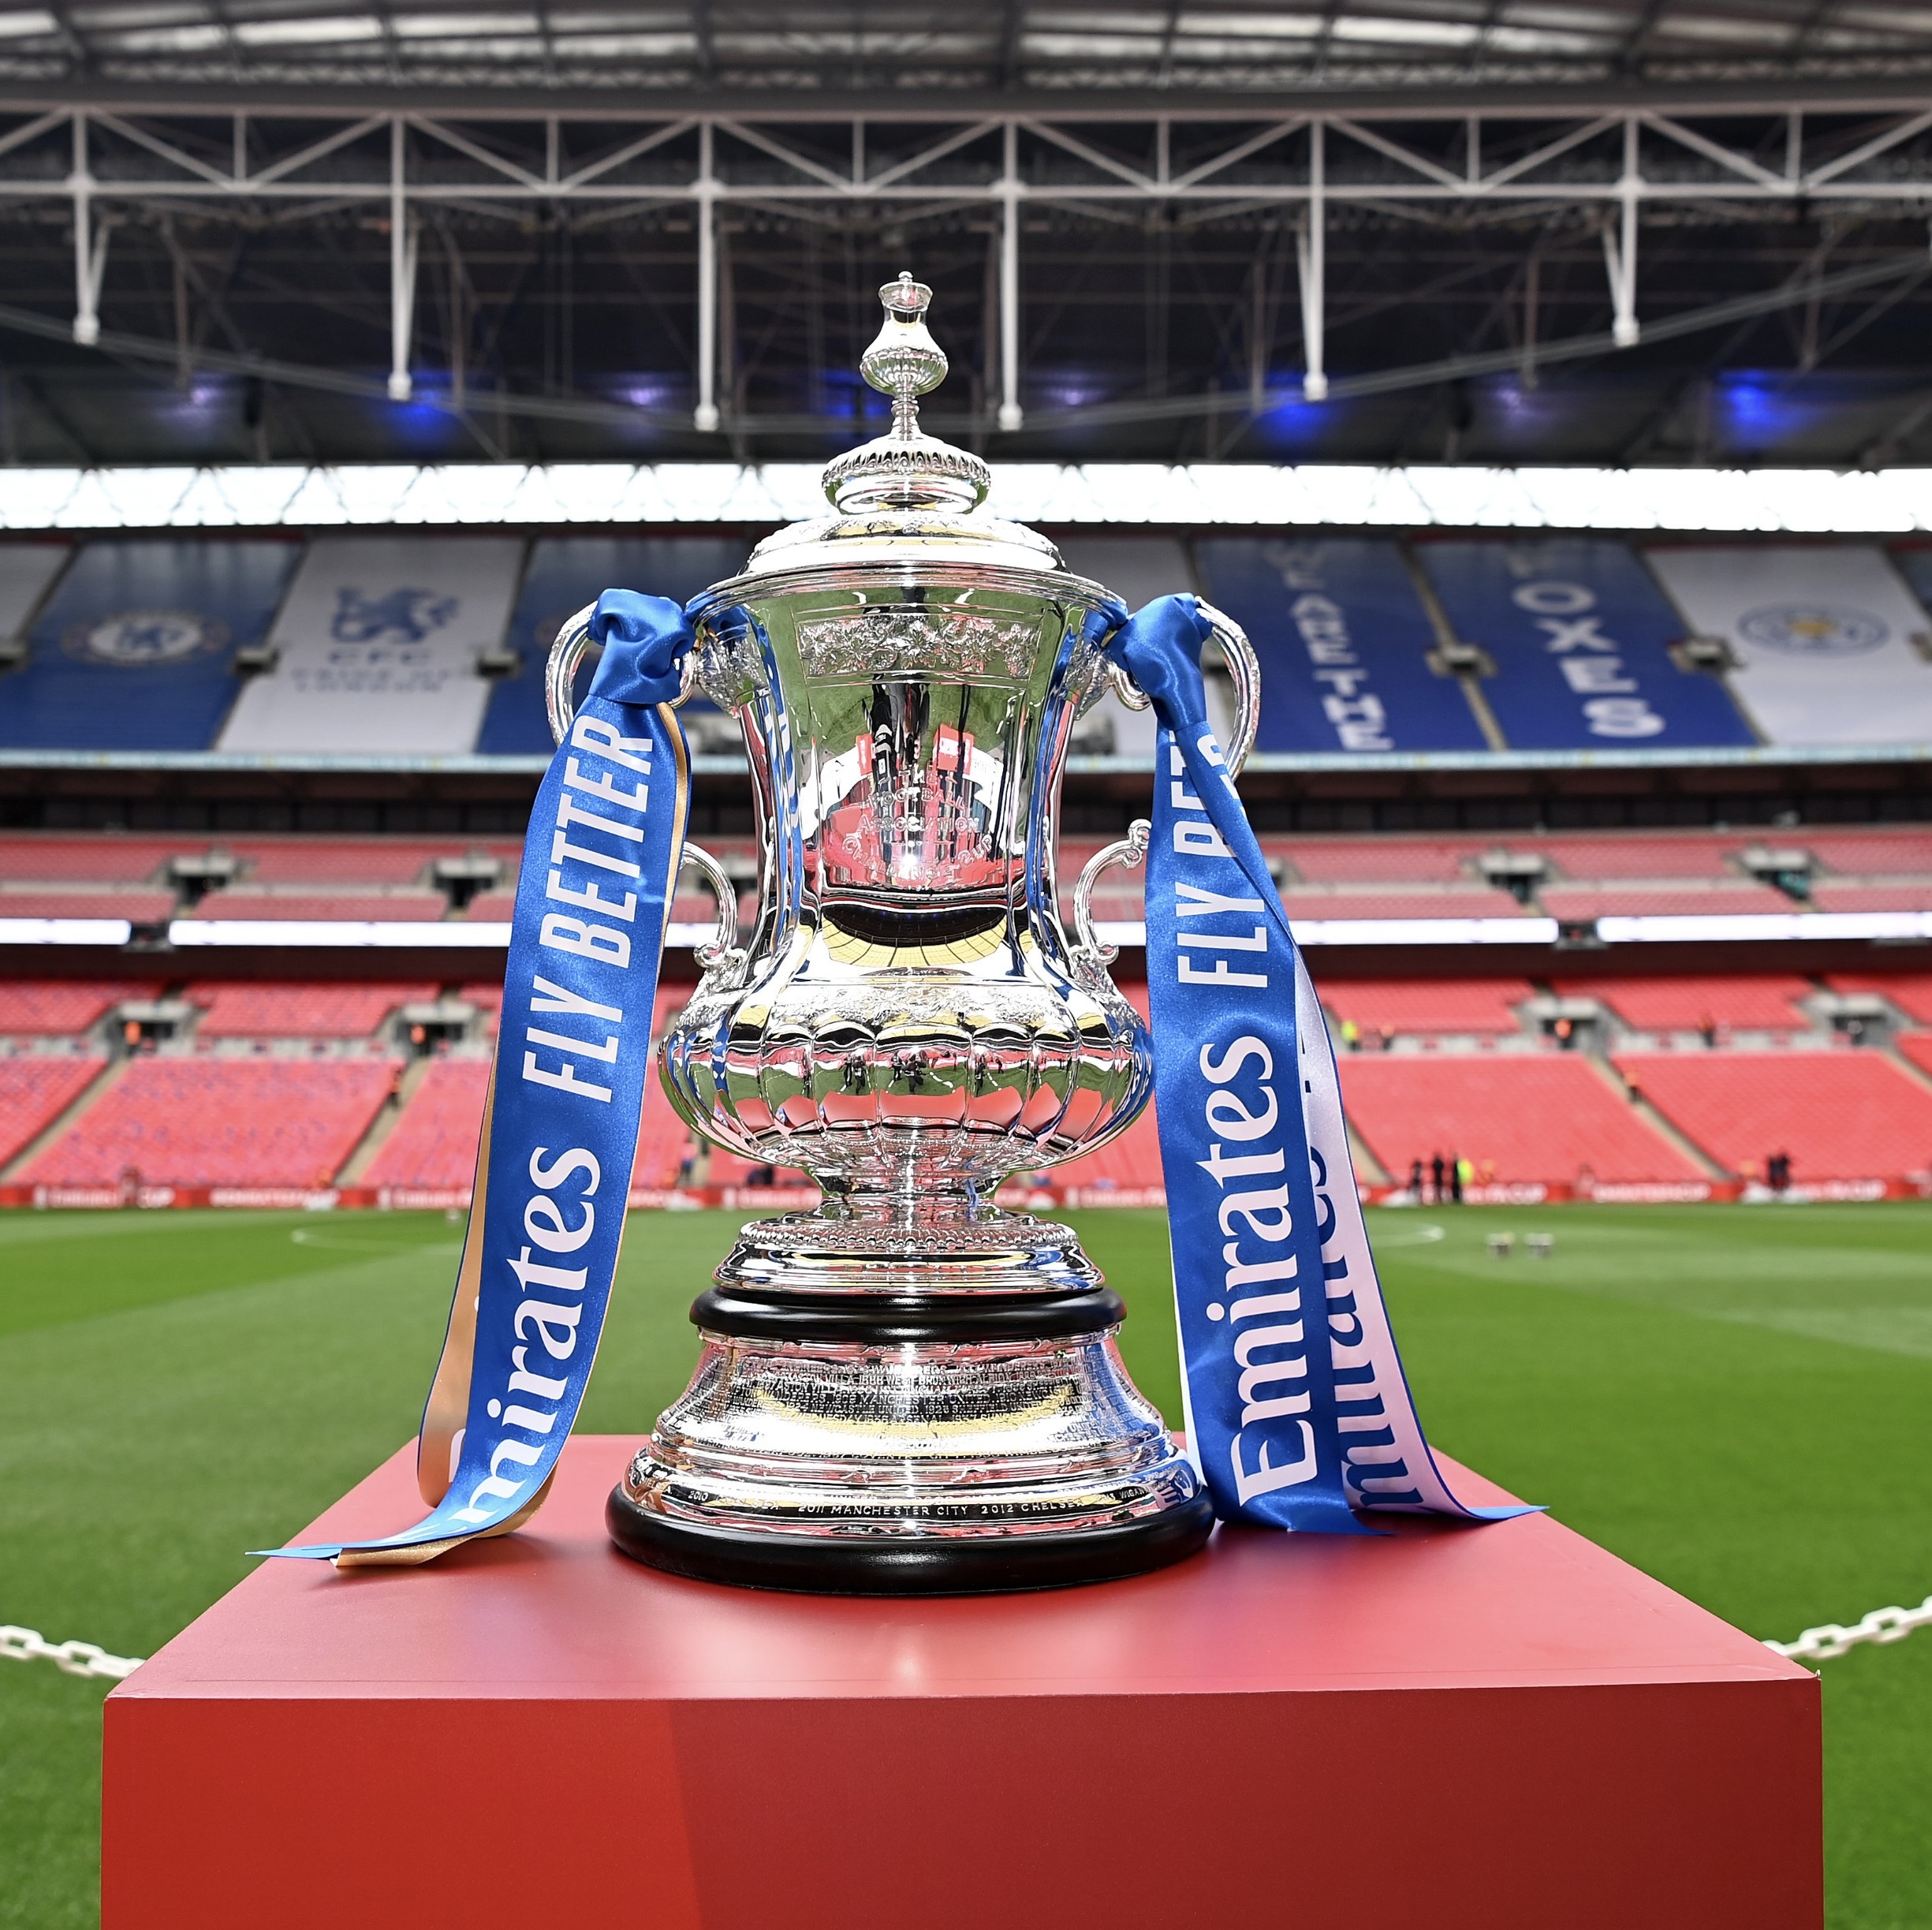 Club Statement on FA Cup Replays